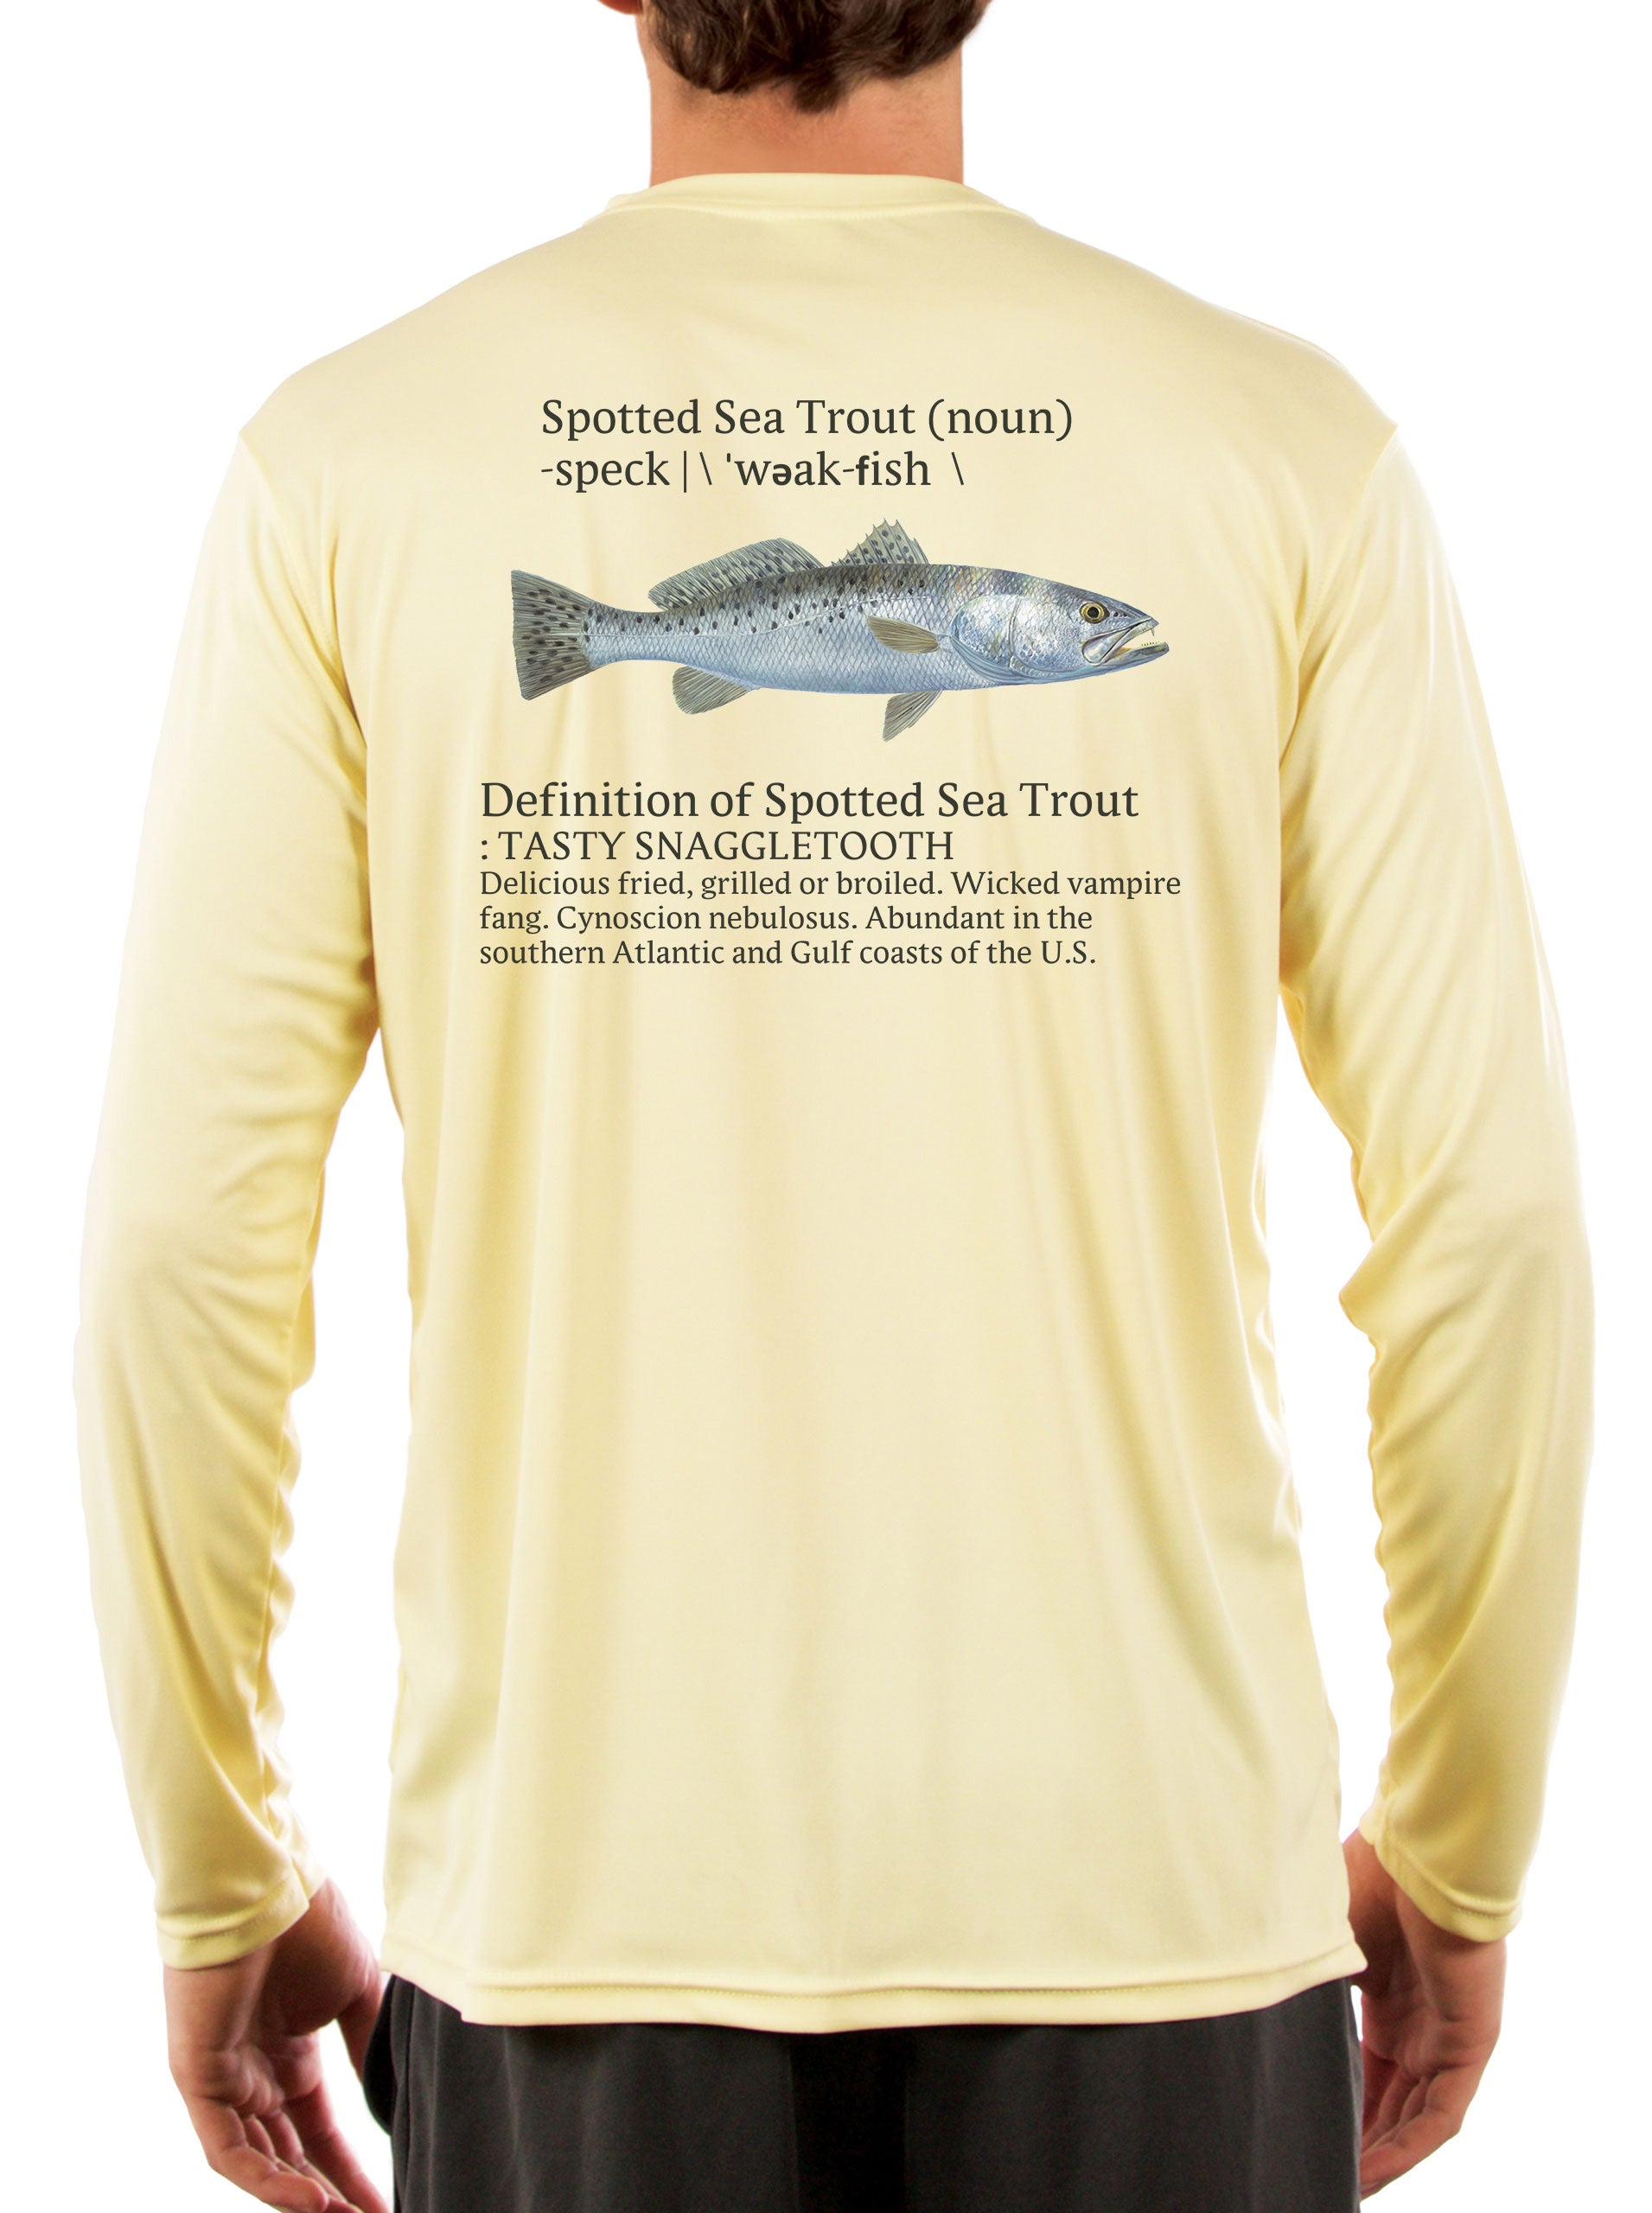 Speckled Trout Fishing Shirts for Men Skiff Inshore - UV Protected +50 Sun Protection with Moisture Wicking Technology - Skiff Life